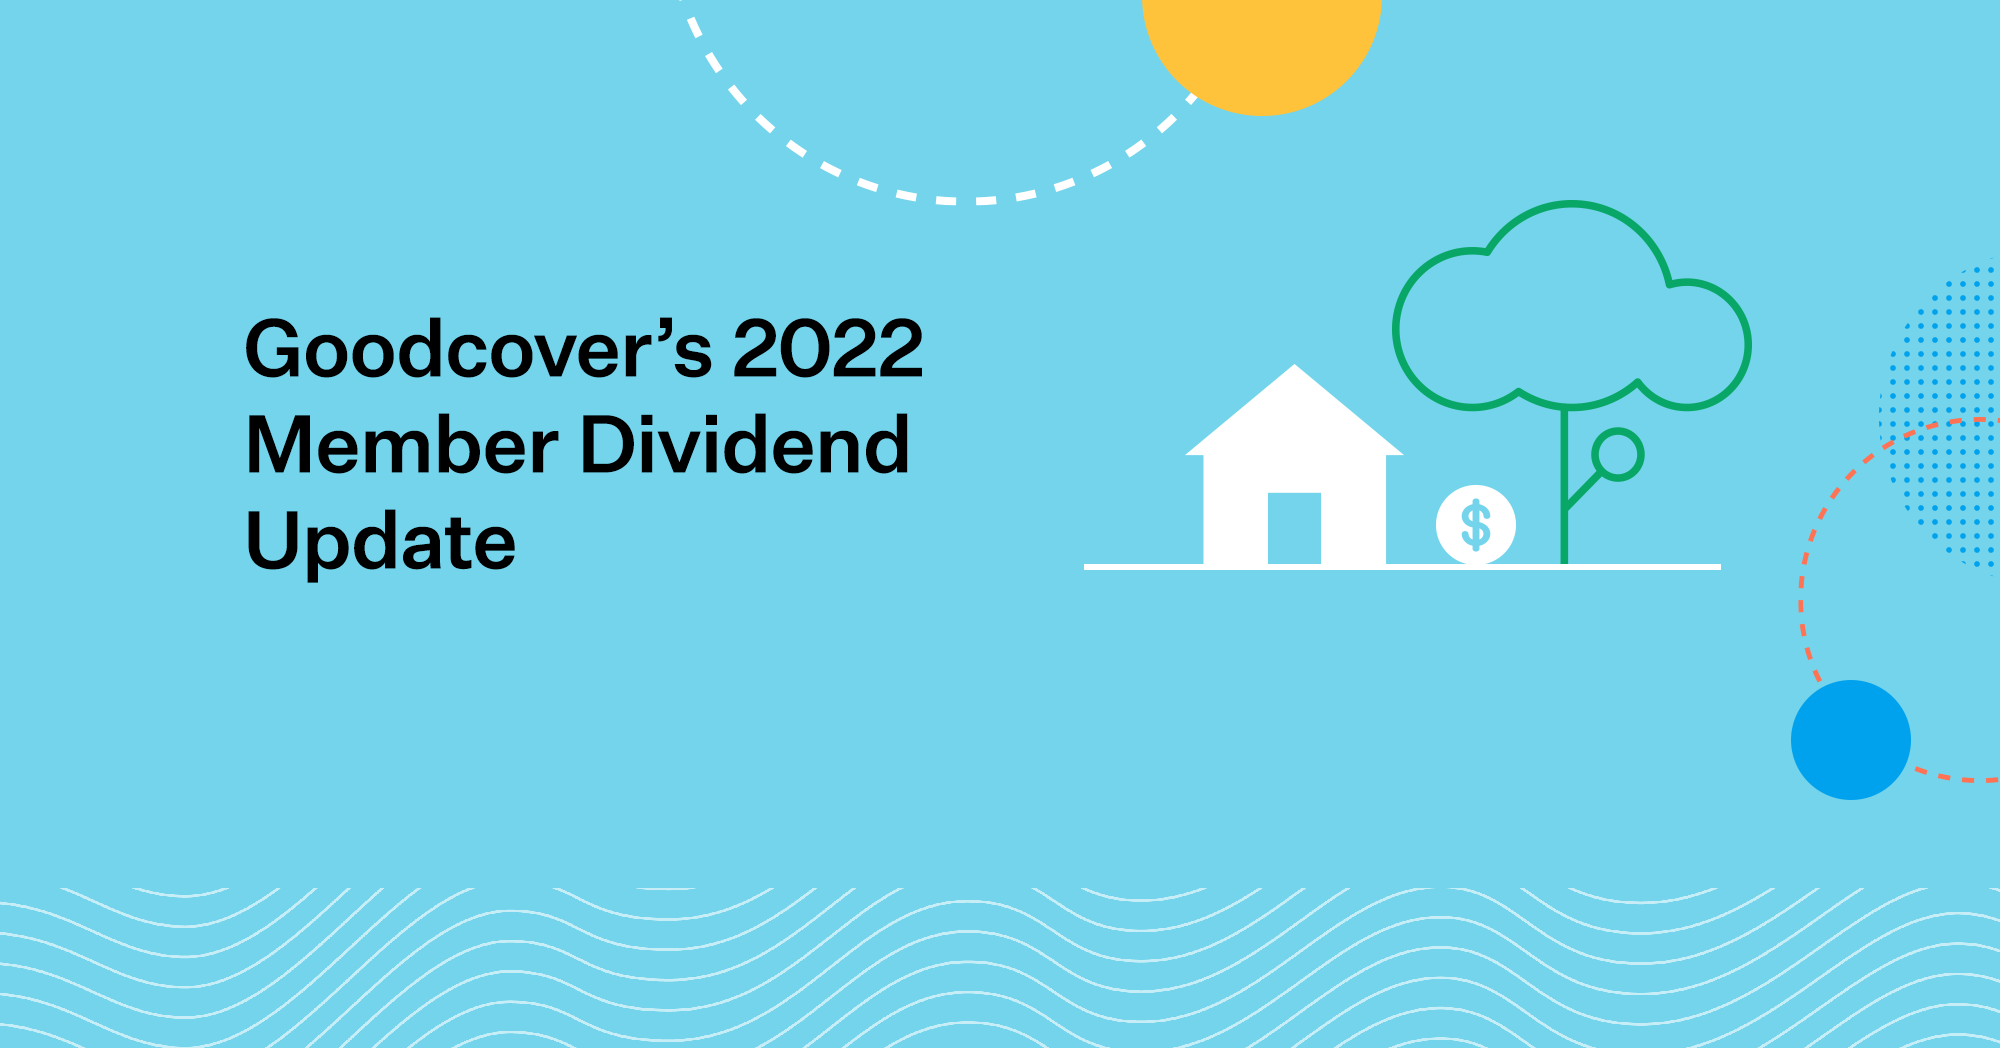 Goodcover’s 2022 Member Dividend Update